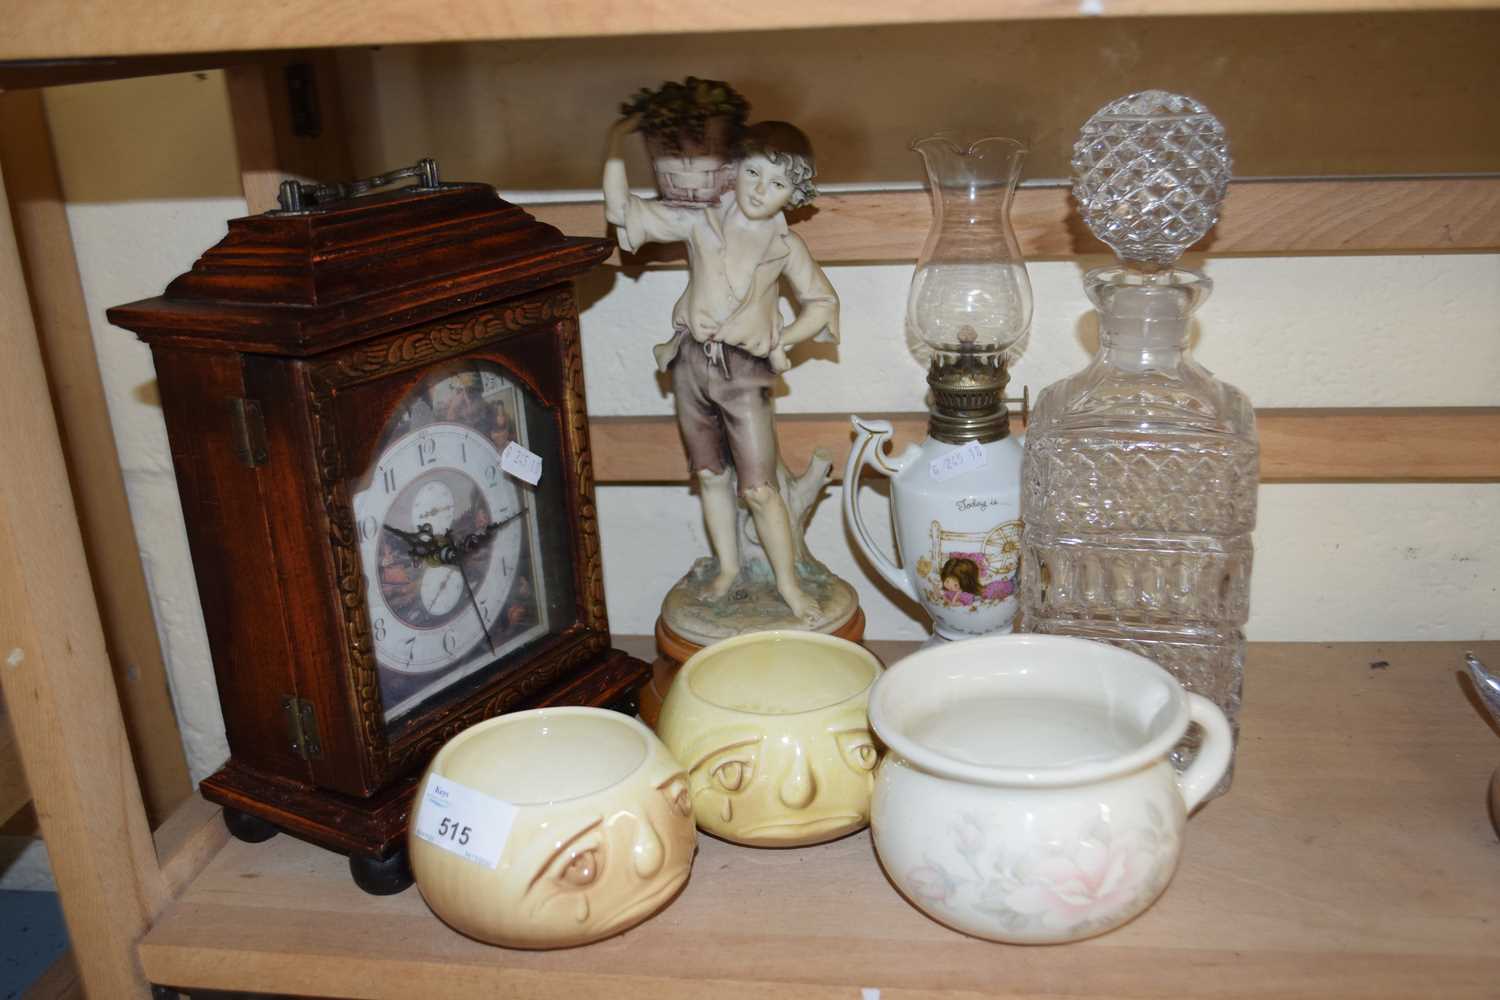 Mixed Lot: Modern mantel clock, small oil lamp, decanter and other items